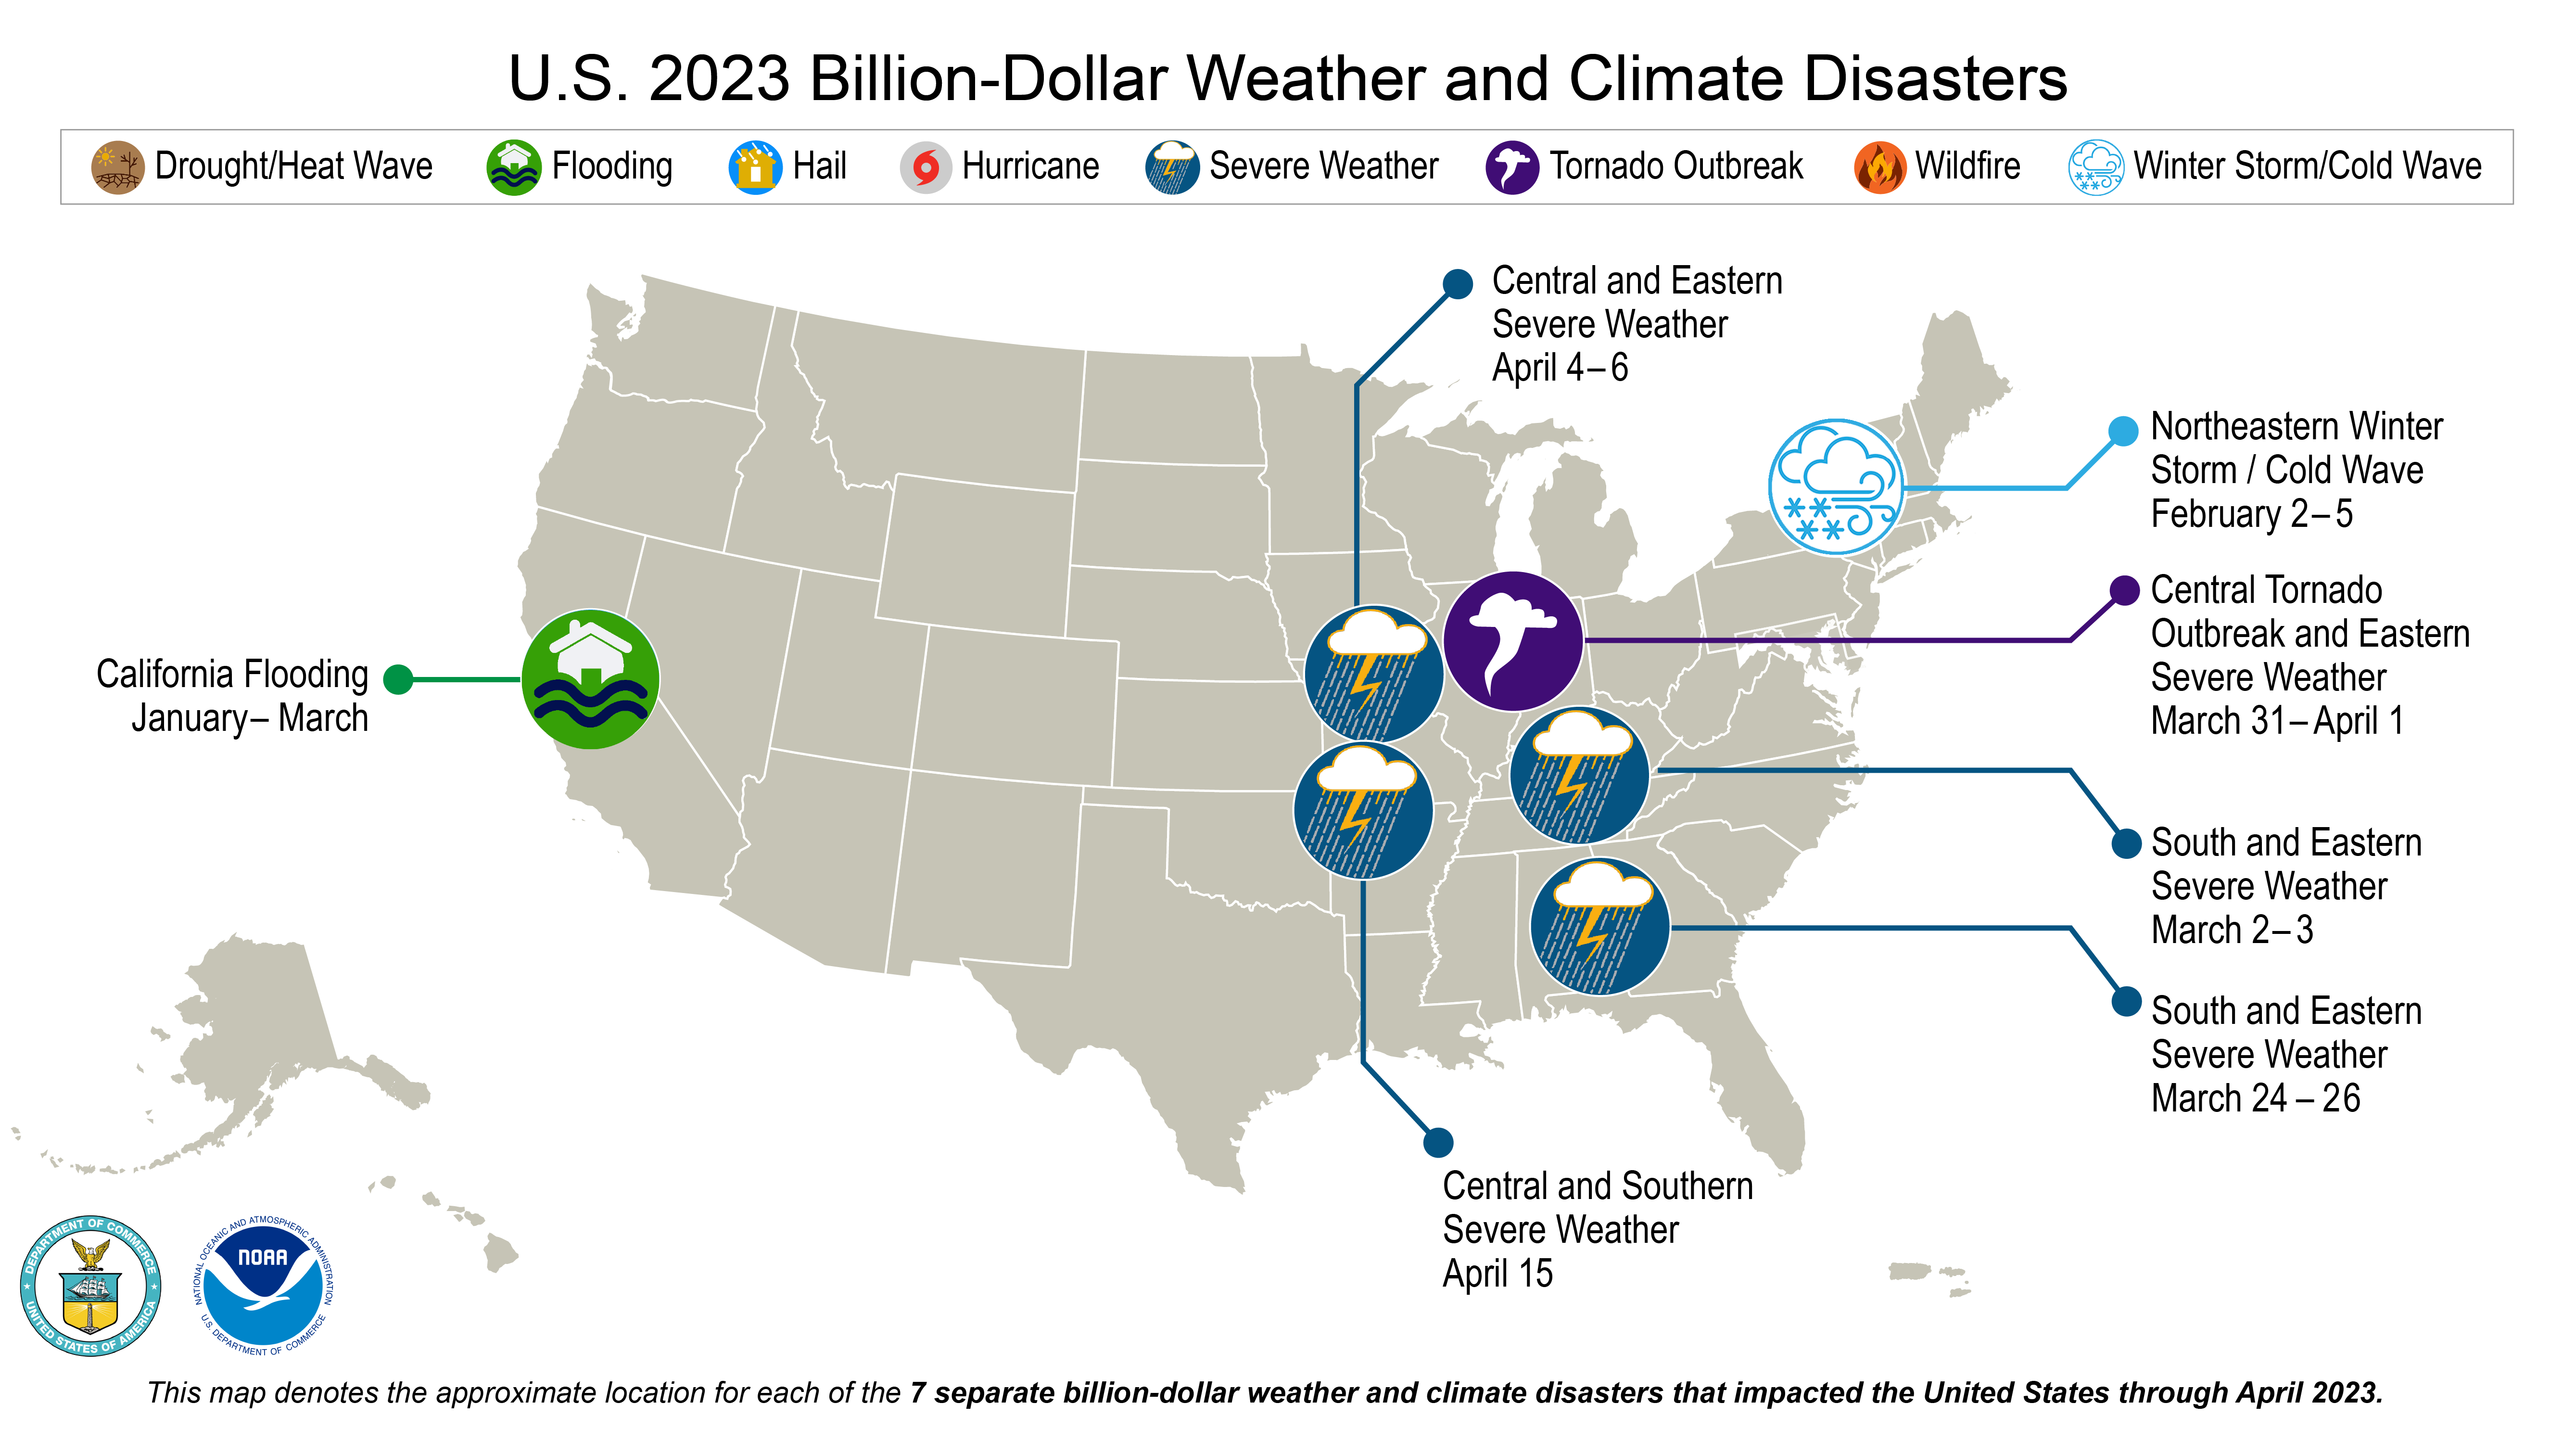  This U.S. map is plotted with seven billion-dollar weather and climate disasters that occurred in the first four months of 2023. For details, please visit the website, ncdc.noaa.gov/billions.   